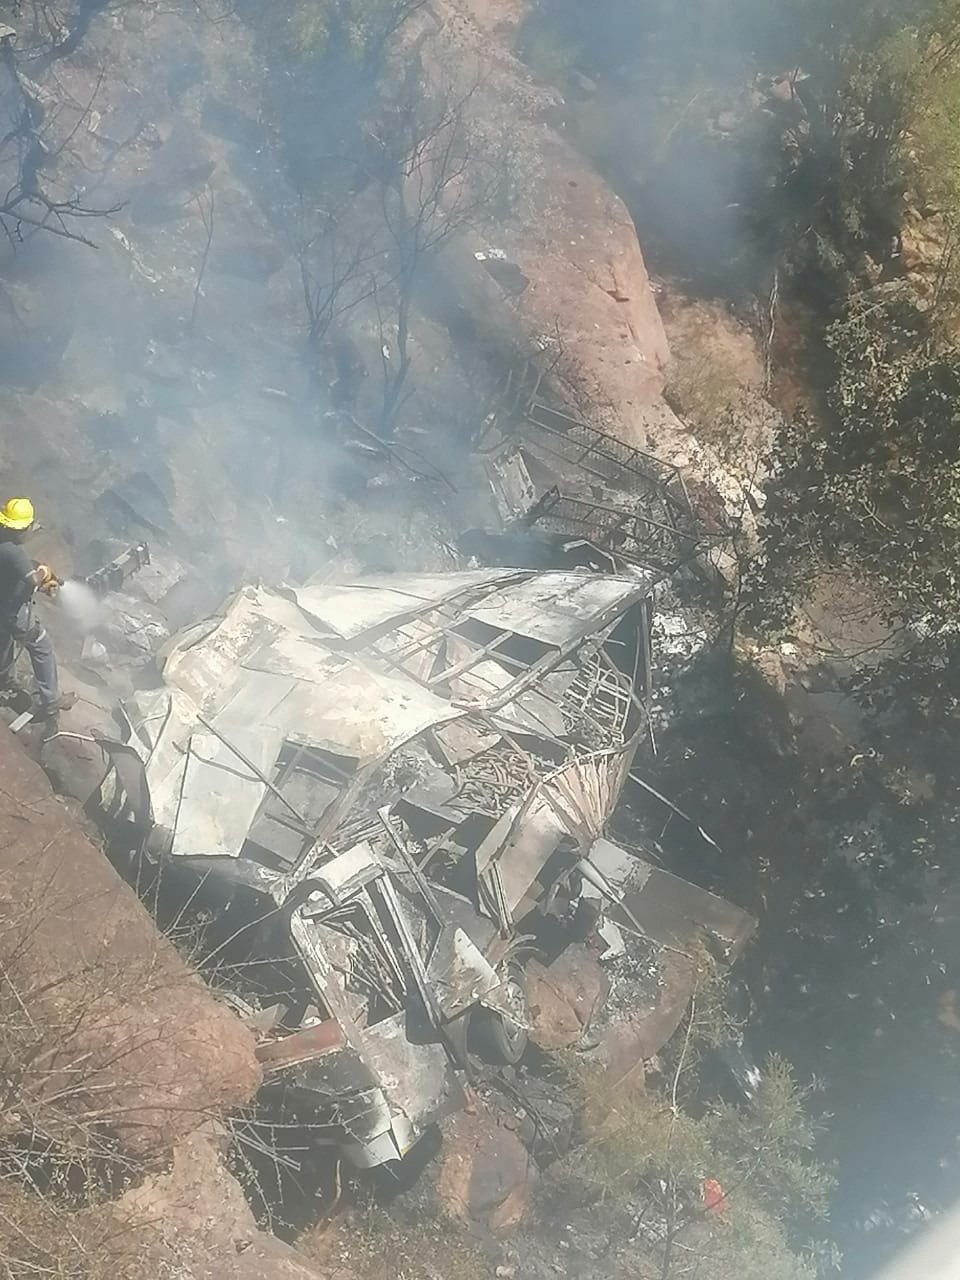 Firefighters hose down the wreckage of a bus after it crashed in Limpopo Province, South Africa on Thursday. Photo:   Limpopo Department of Transport and Community Safety via Reuters